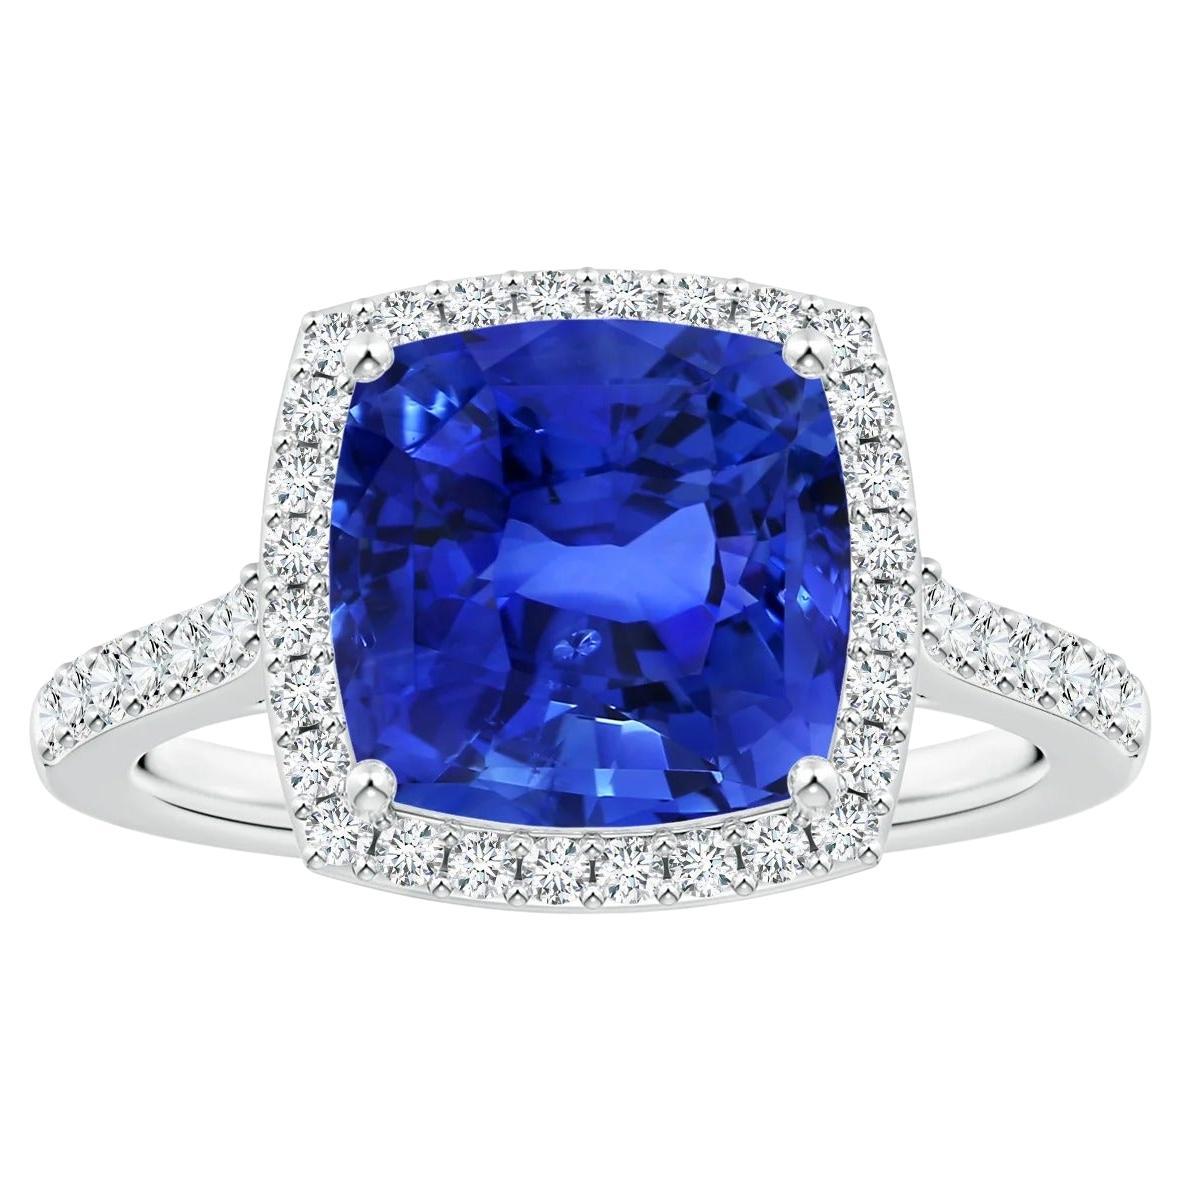 For Sale:  ANGARA GIA Certified Natural Blue Sapphire Halo Ring in White Gold with Diamonds